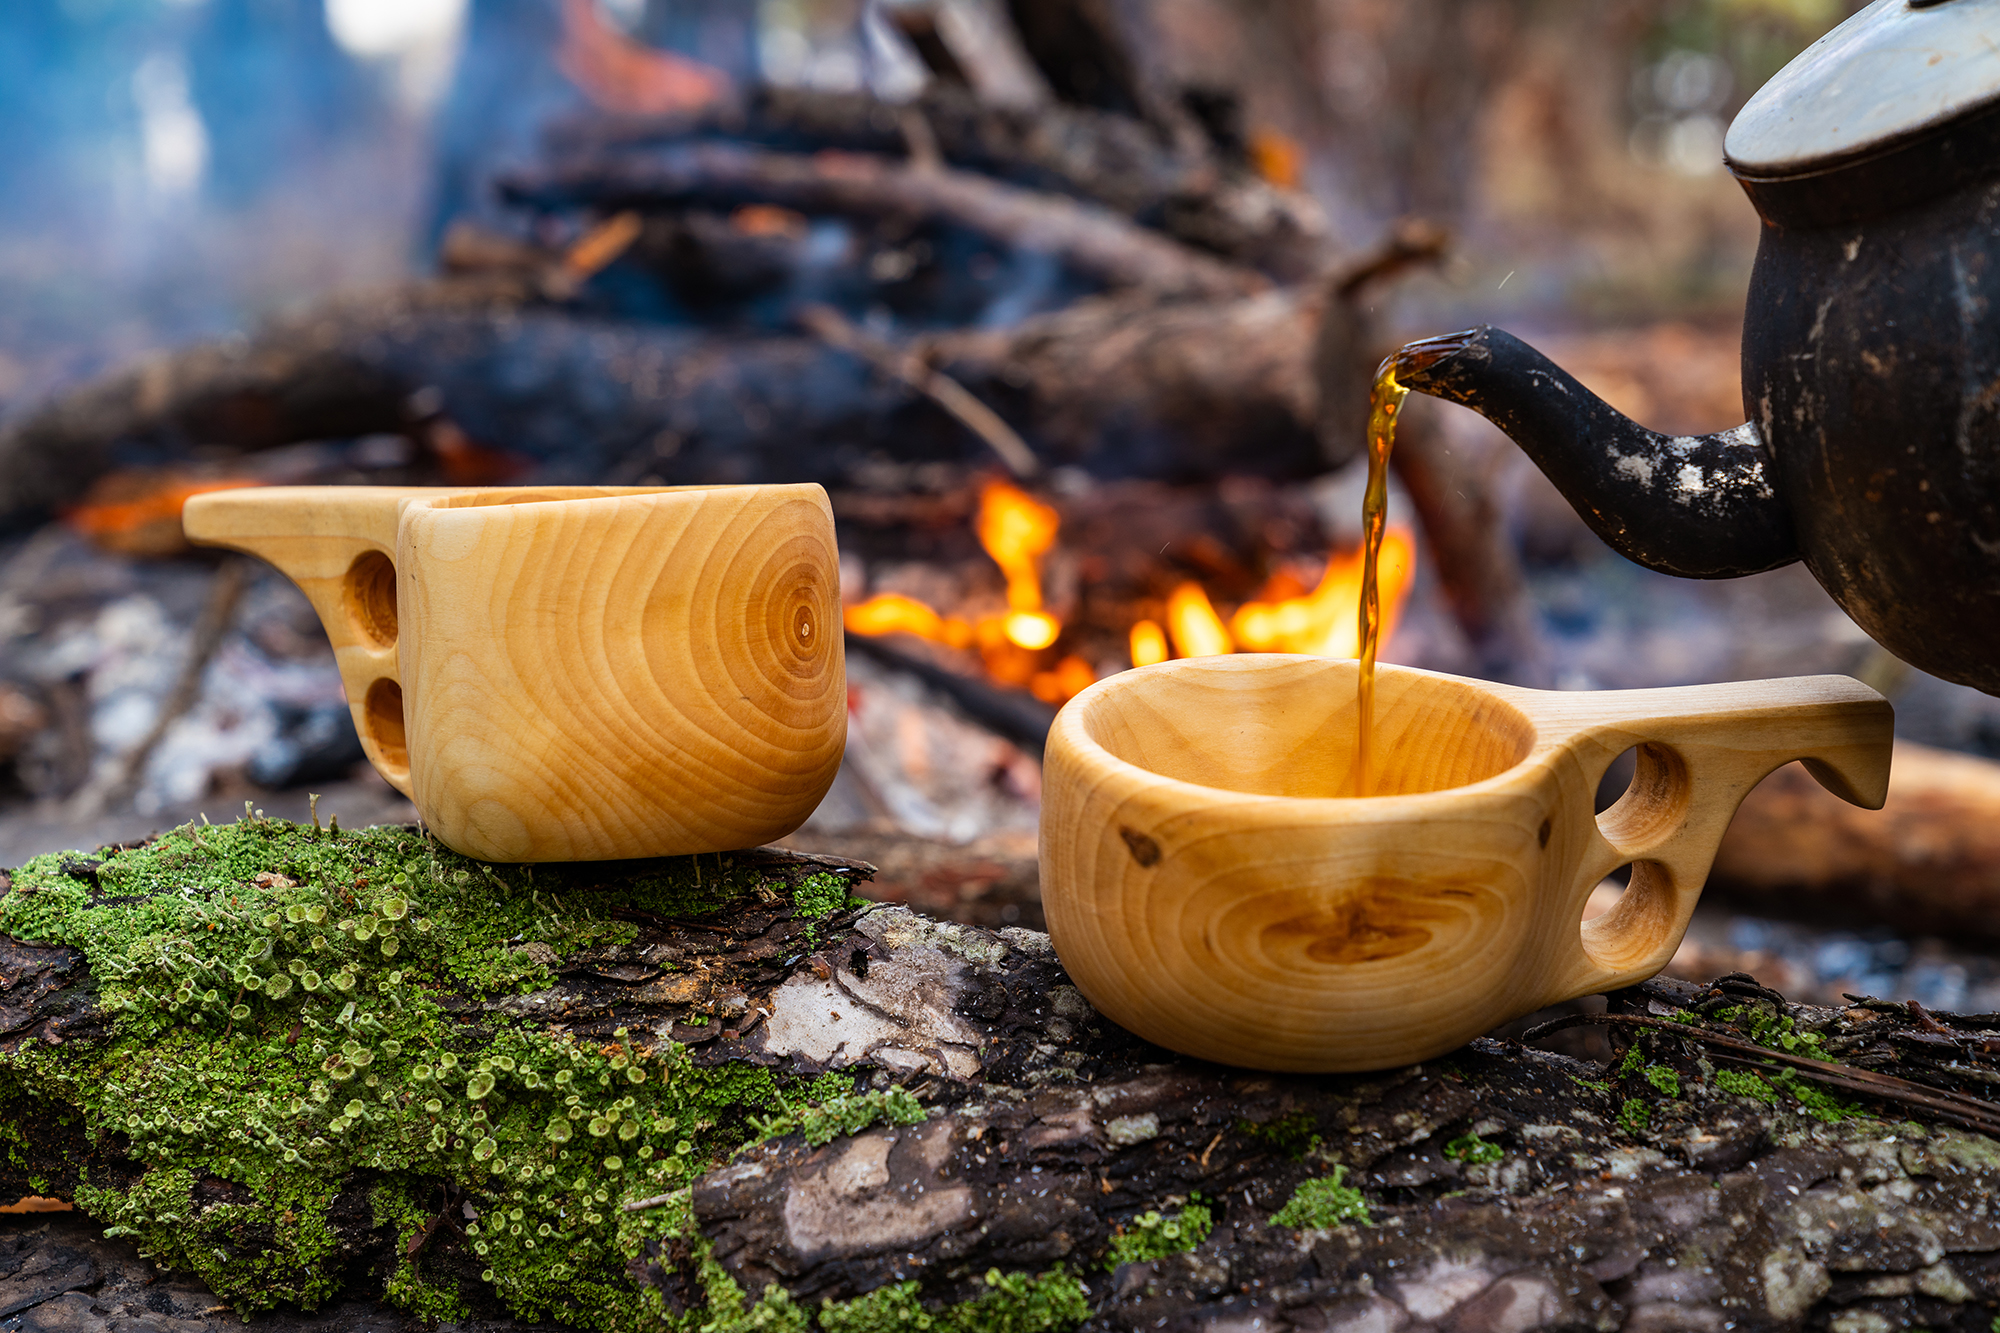 Drinking coffee might not make you happy, but sharing it with friends outdoors, as Finns do, could help.